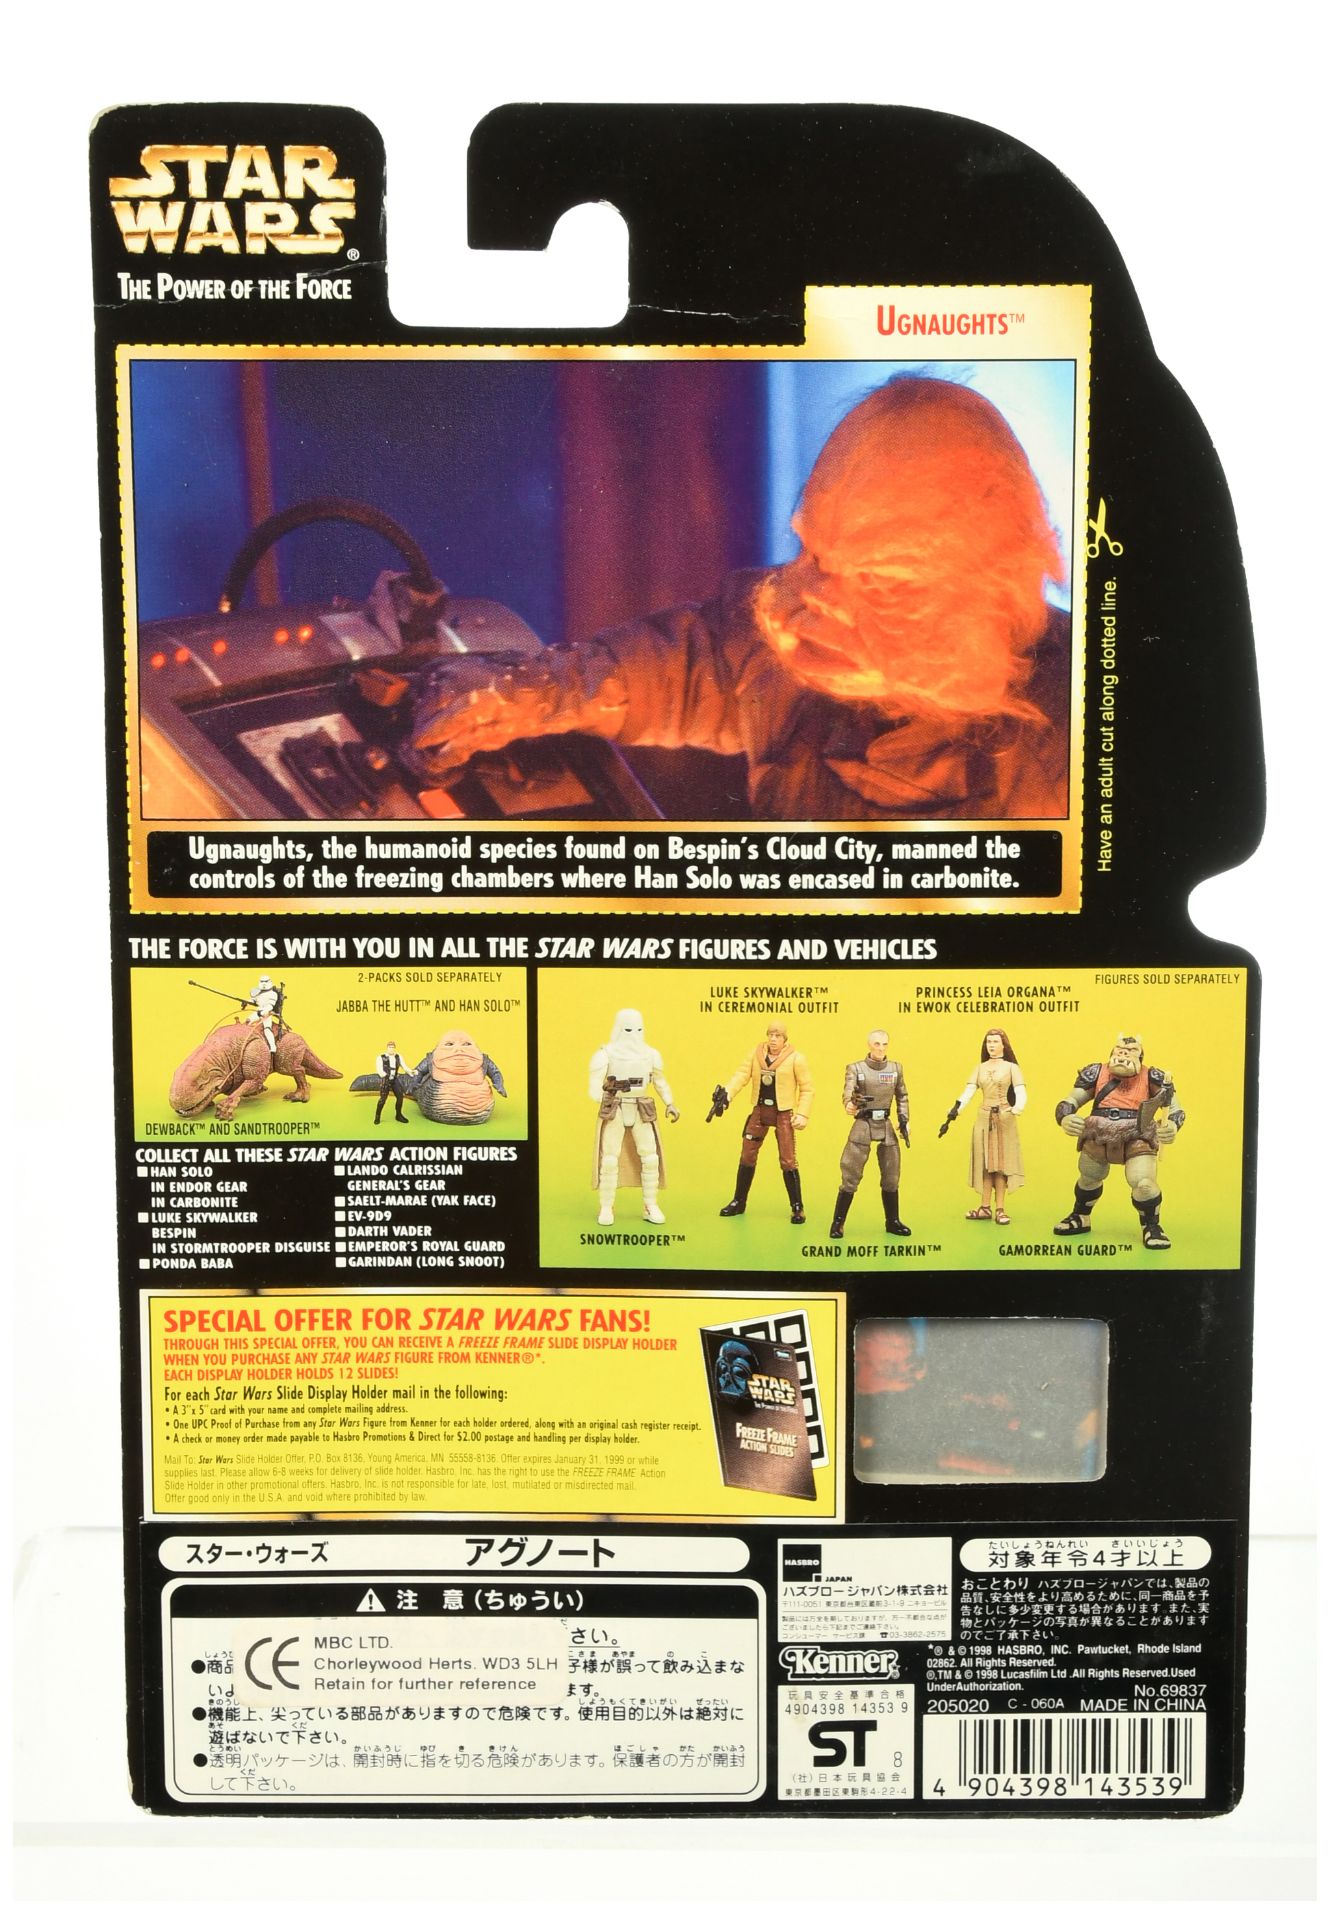 Kenner Star Wars The Power of the Force Green Freeze Frame card Ugnaughts 3 3/4" signed figure - Image 2 of 4